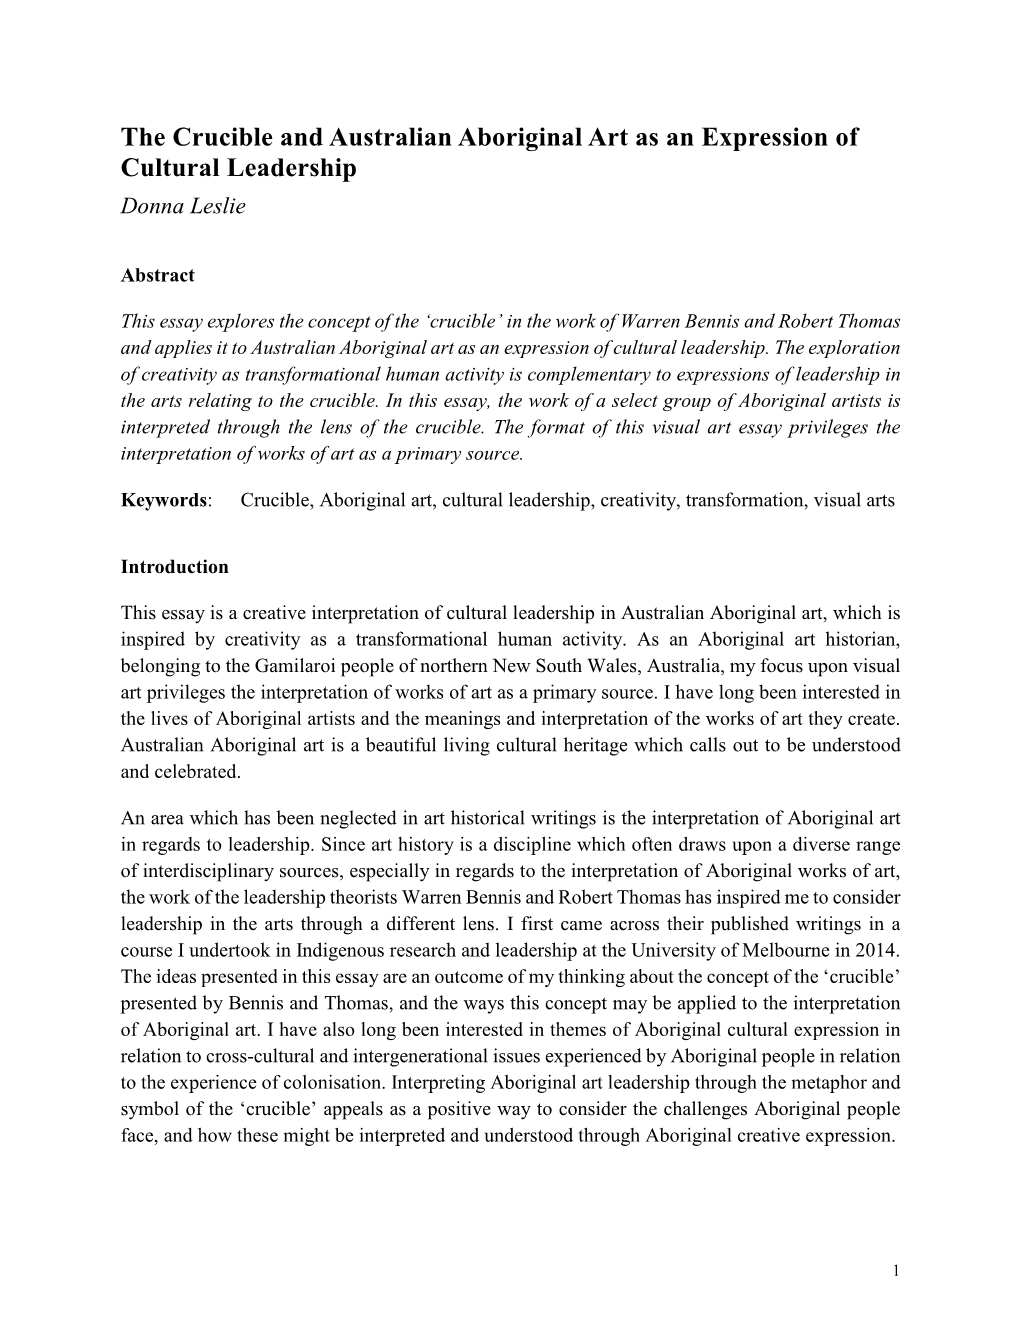 The Crucible and Australian Aboriginal Art As an Expression of Cultural Leadership Donna Leslie